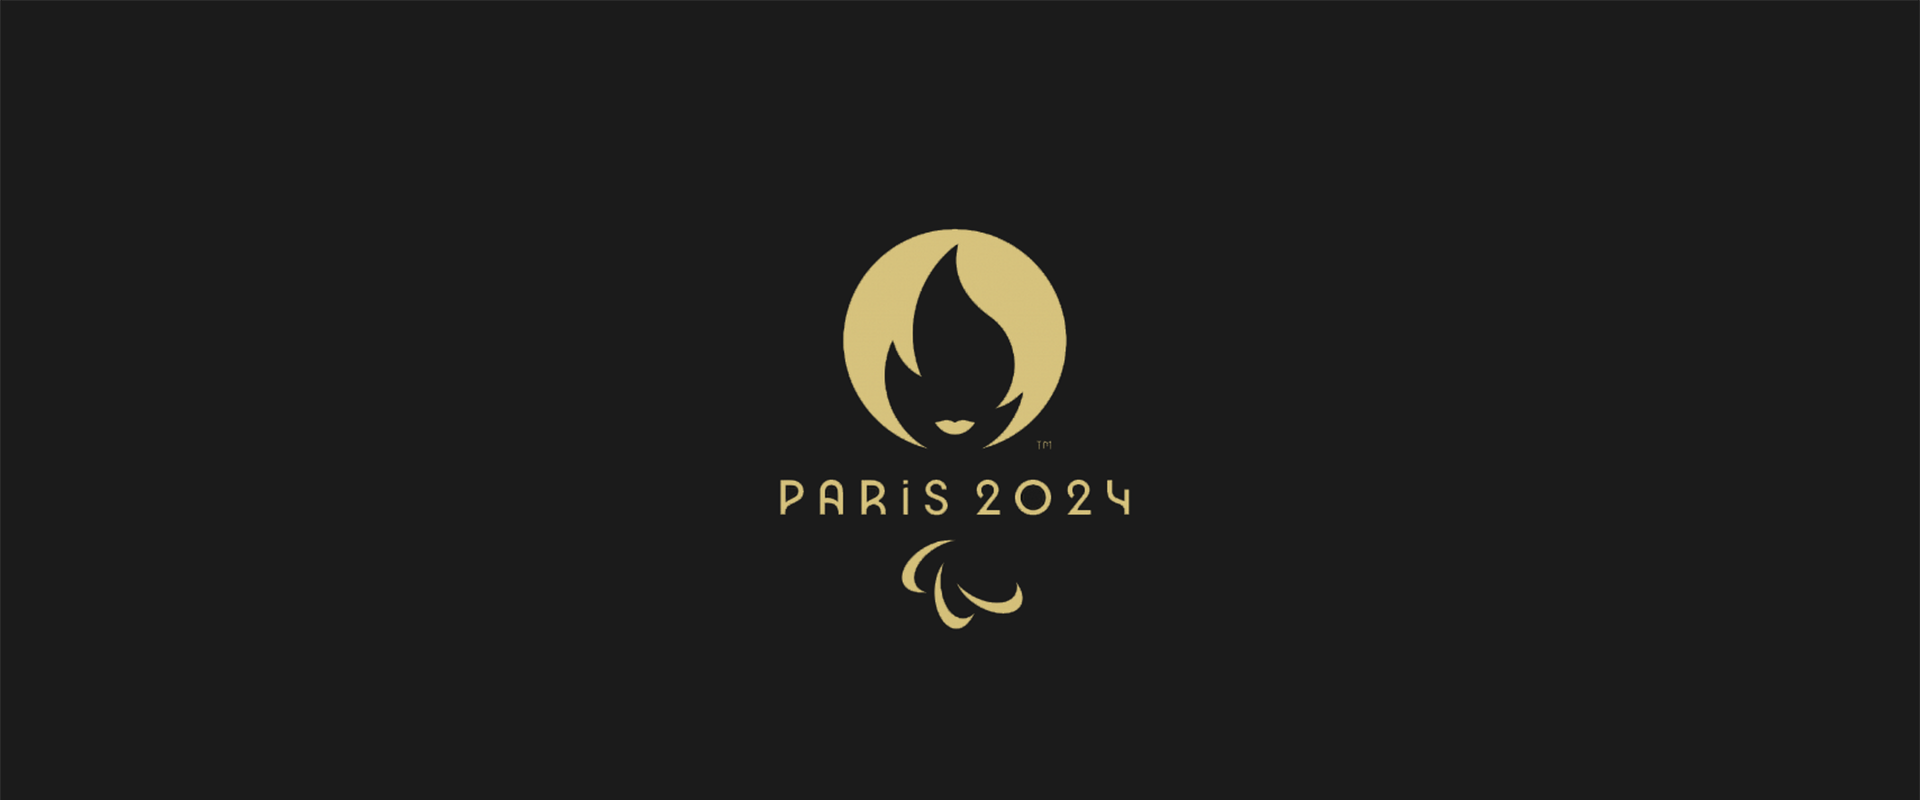 Olympic flame or dating ad? Paris 2024 logo divides opinion